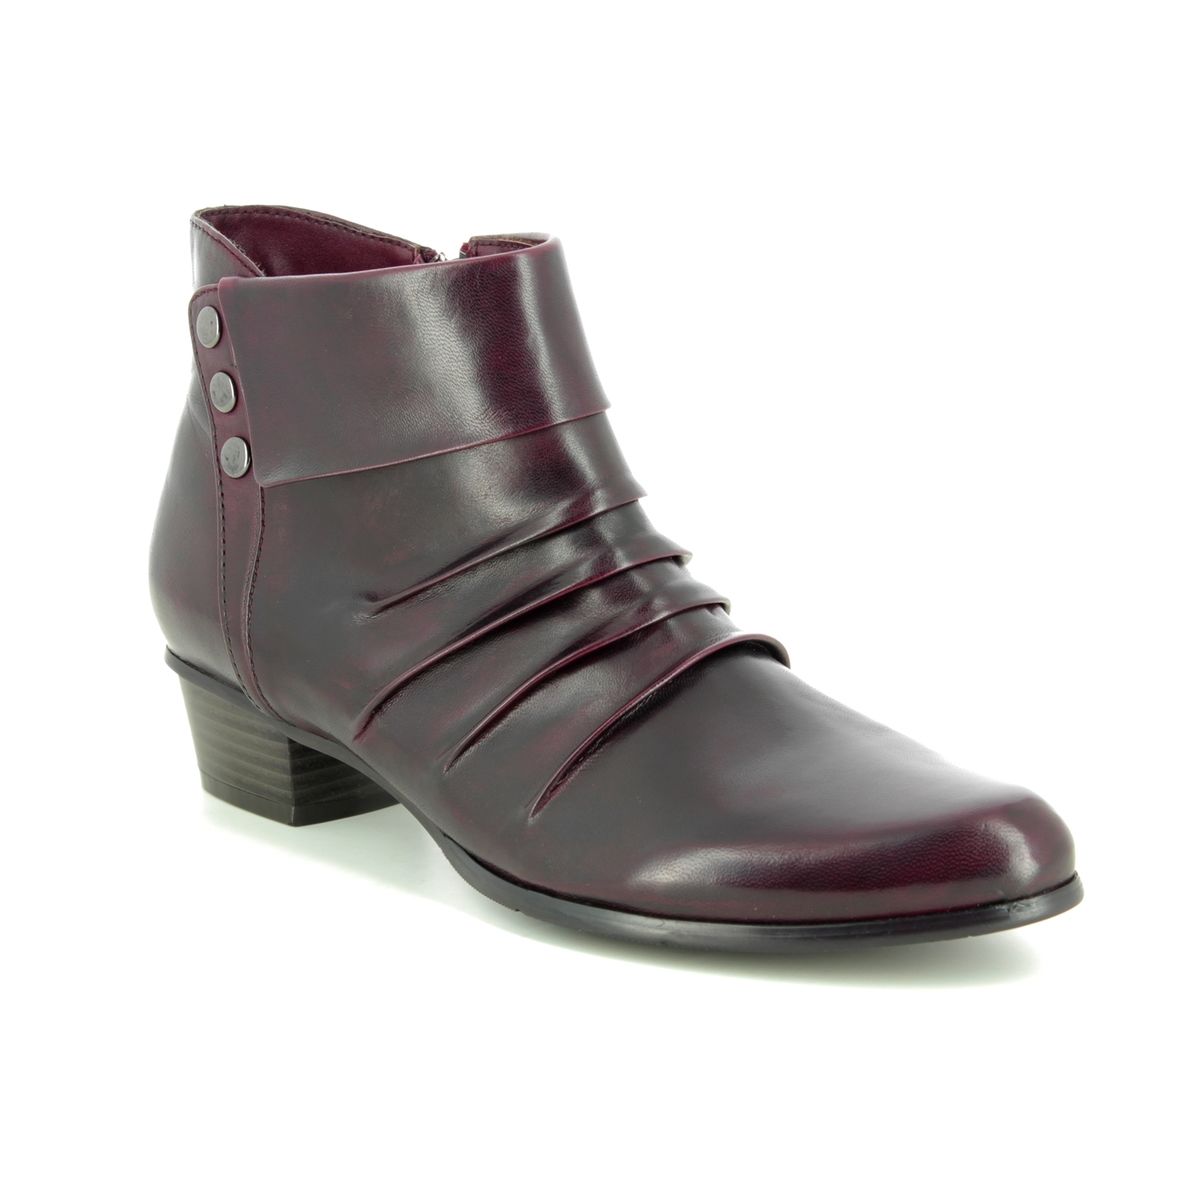 Regarde le Ciel Stefany 278 8008-81 Wine leather ankle boots